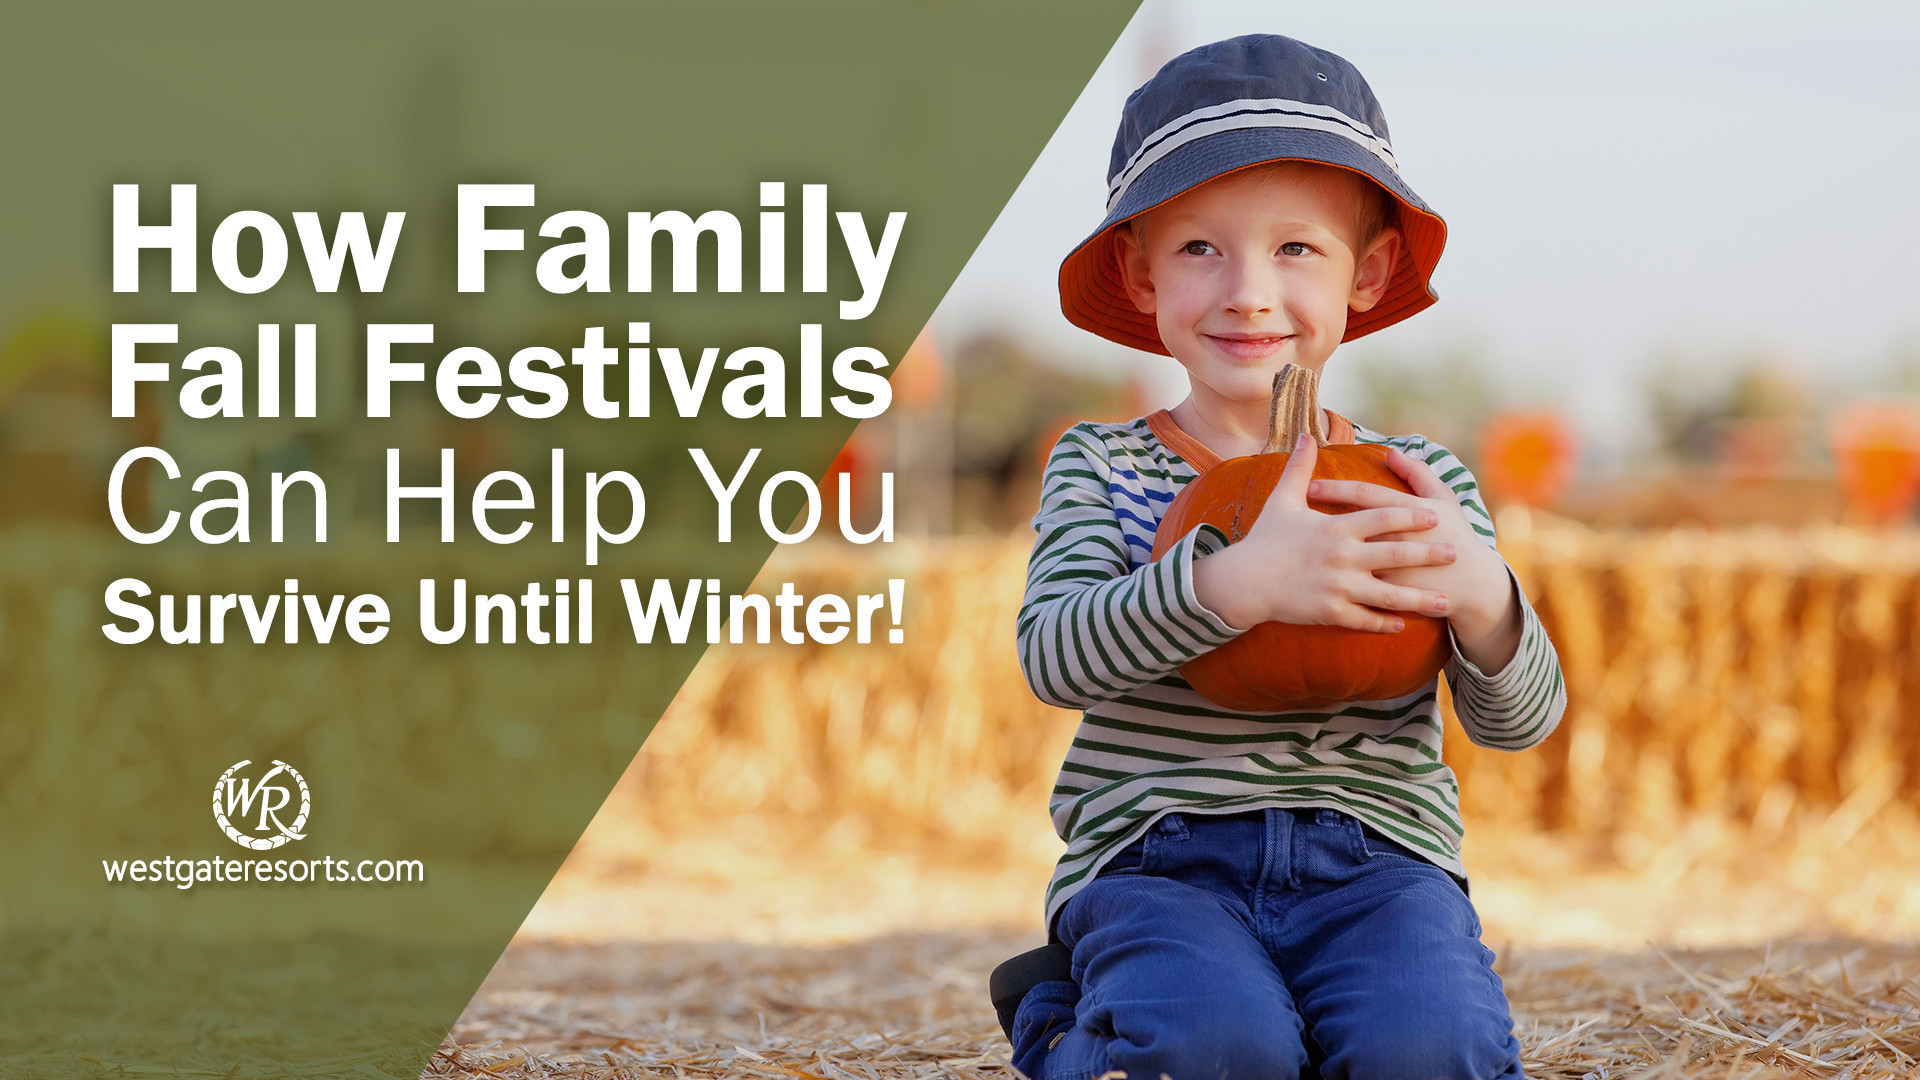 How Family Fall Festivals Can Help You Survive! | Fall Festival Activities | Westgate Resorts